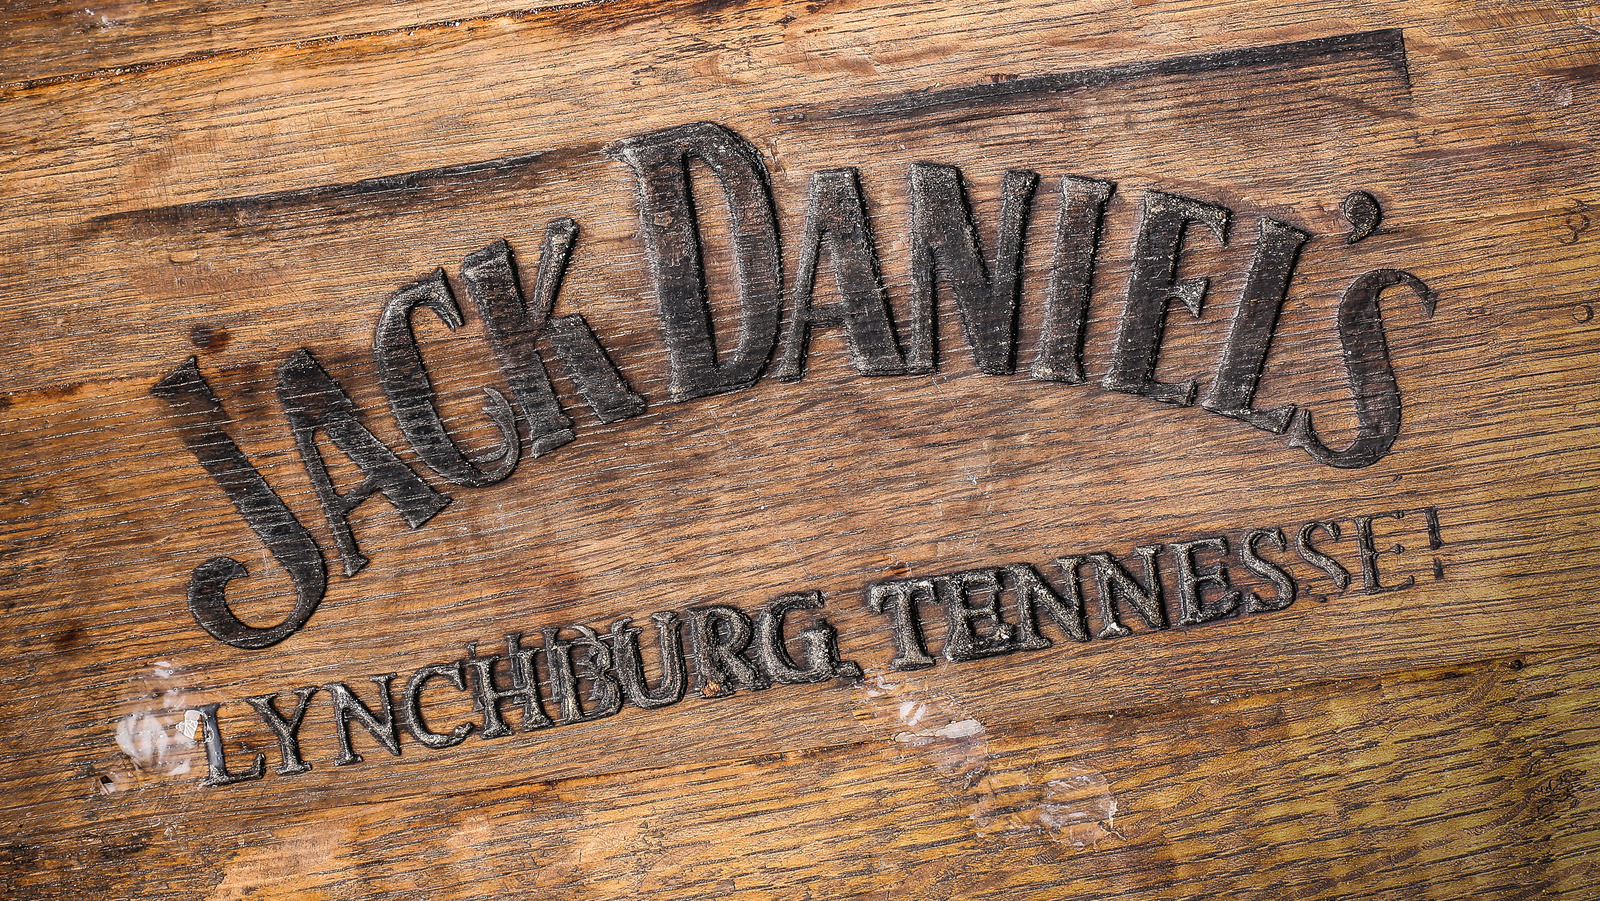 The Real Reason Jack Daniel's Only Uses Its Whiskey Barrels Once